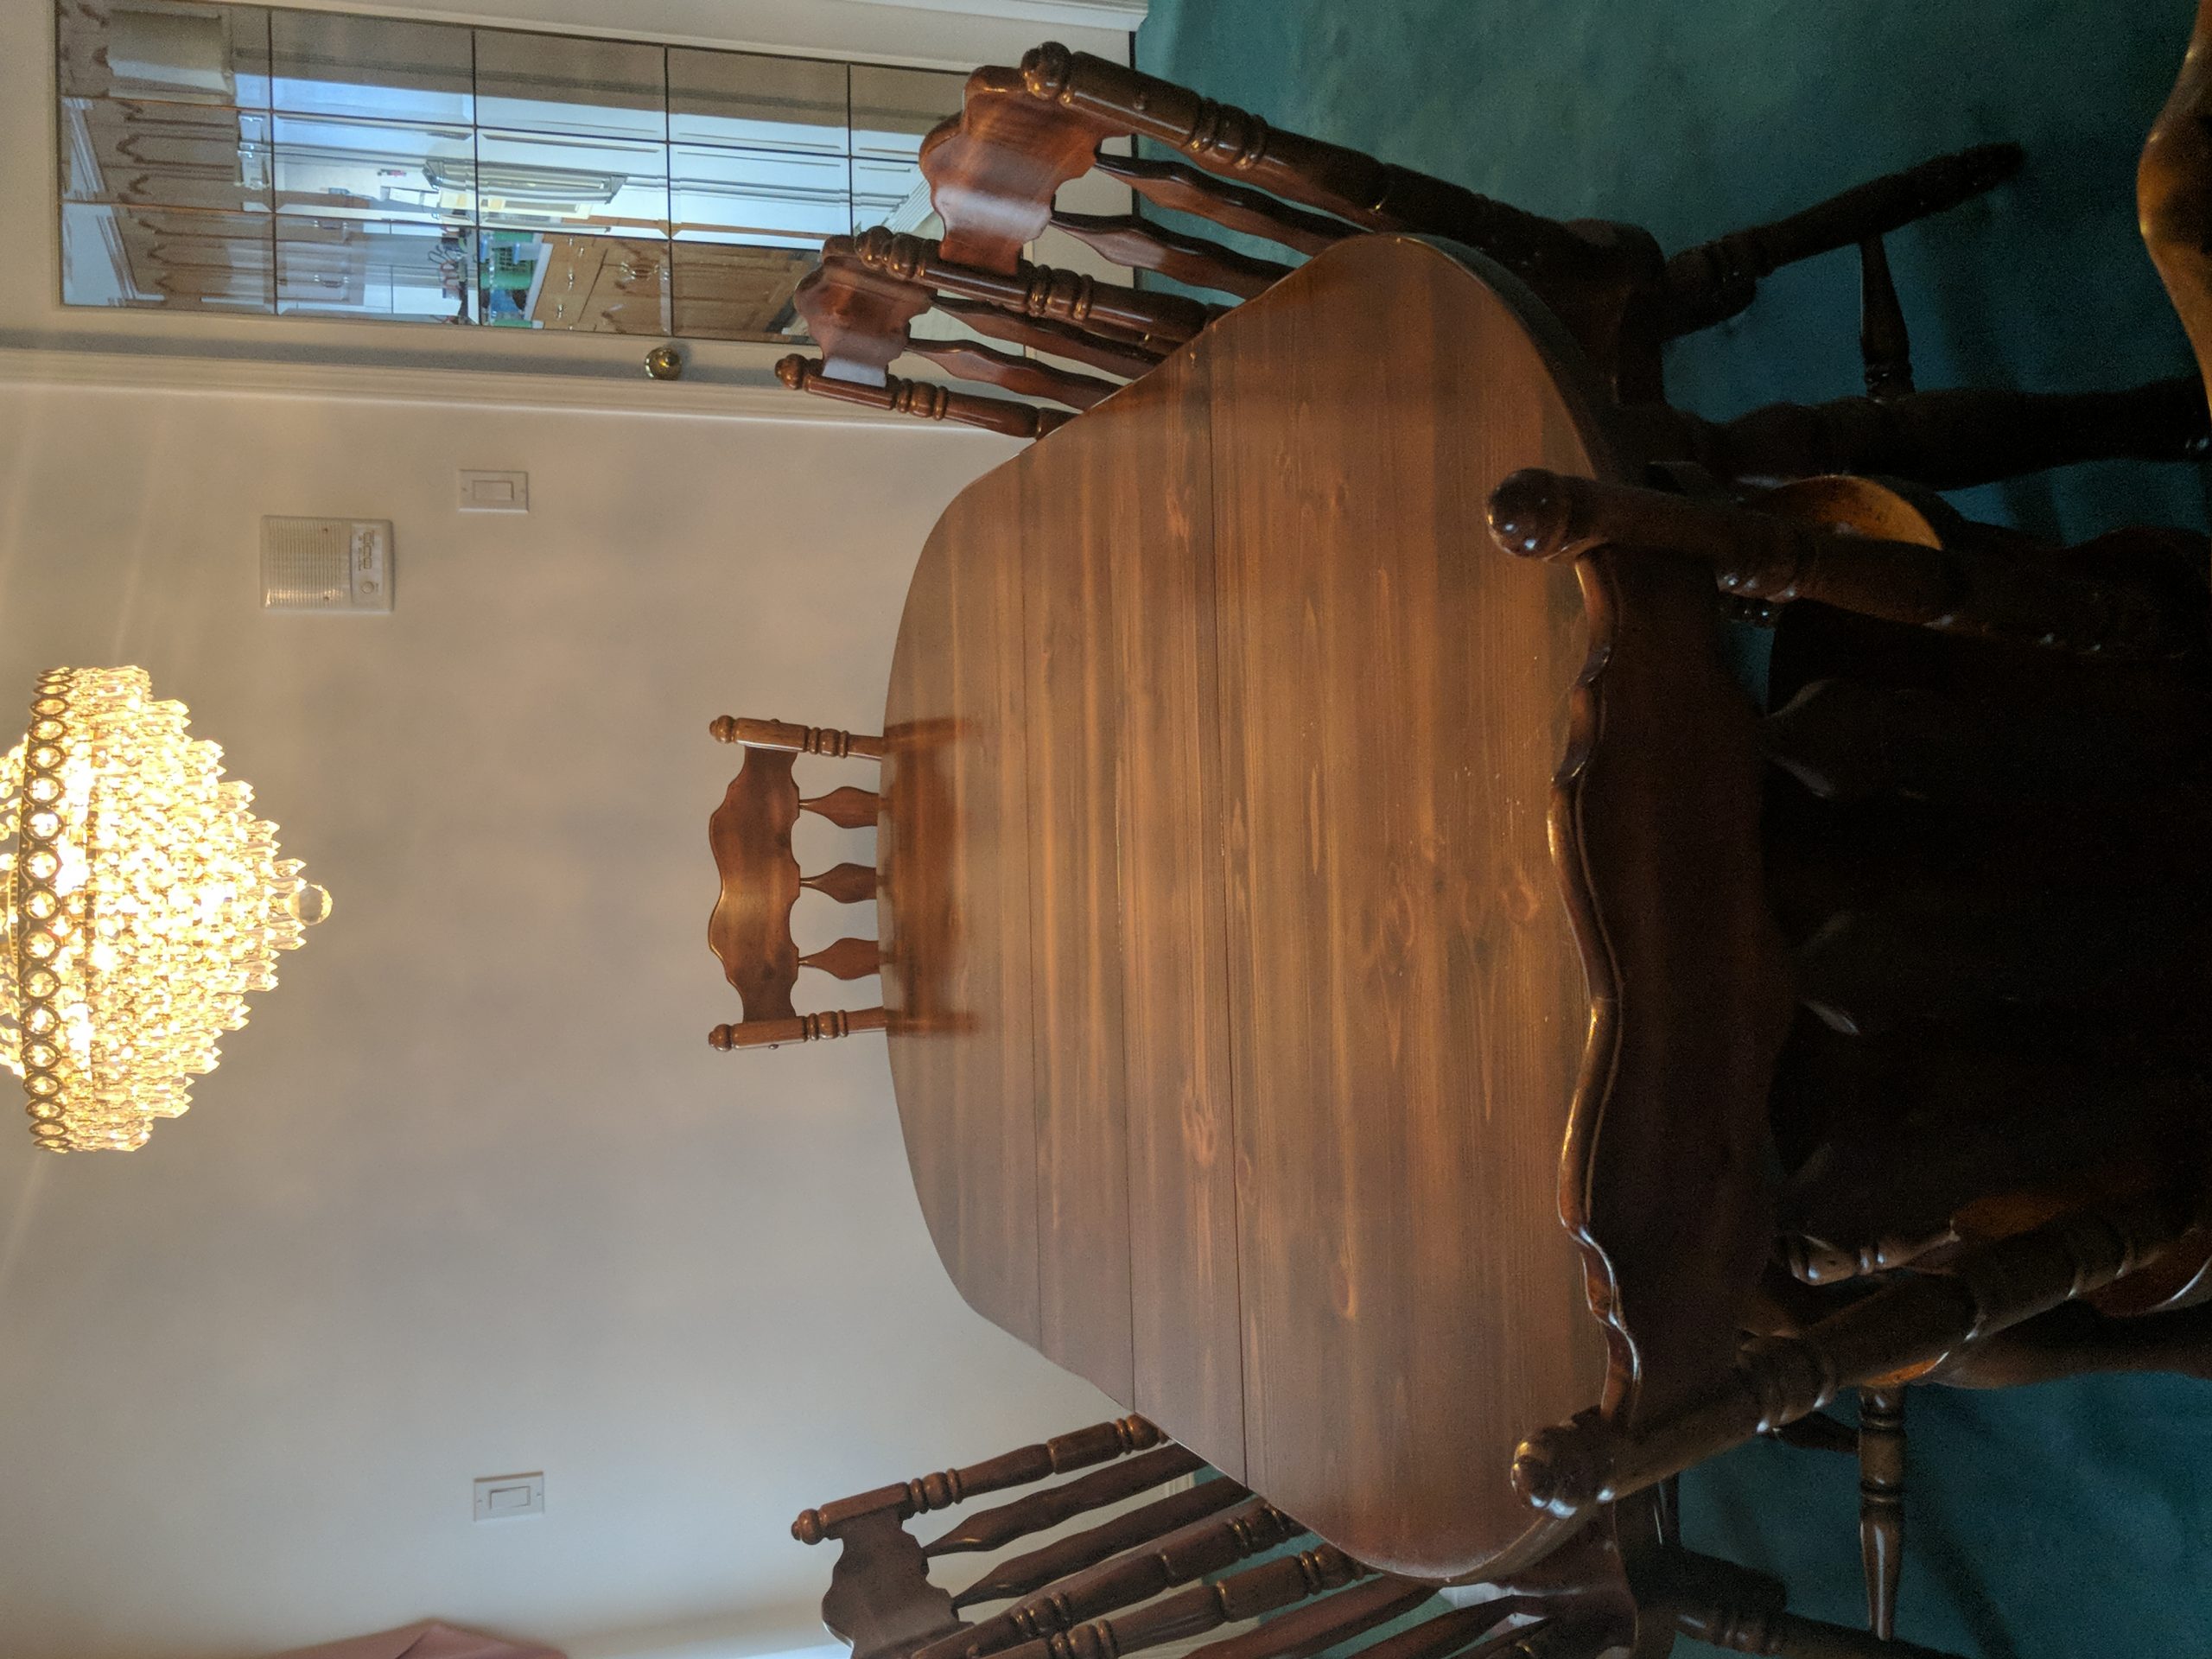 soild dining table and chairs and hatch